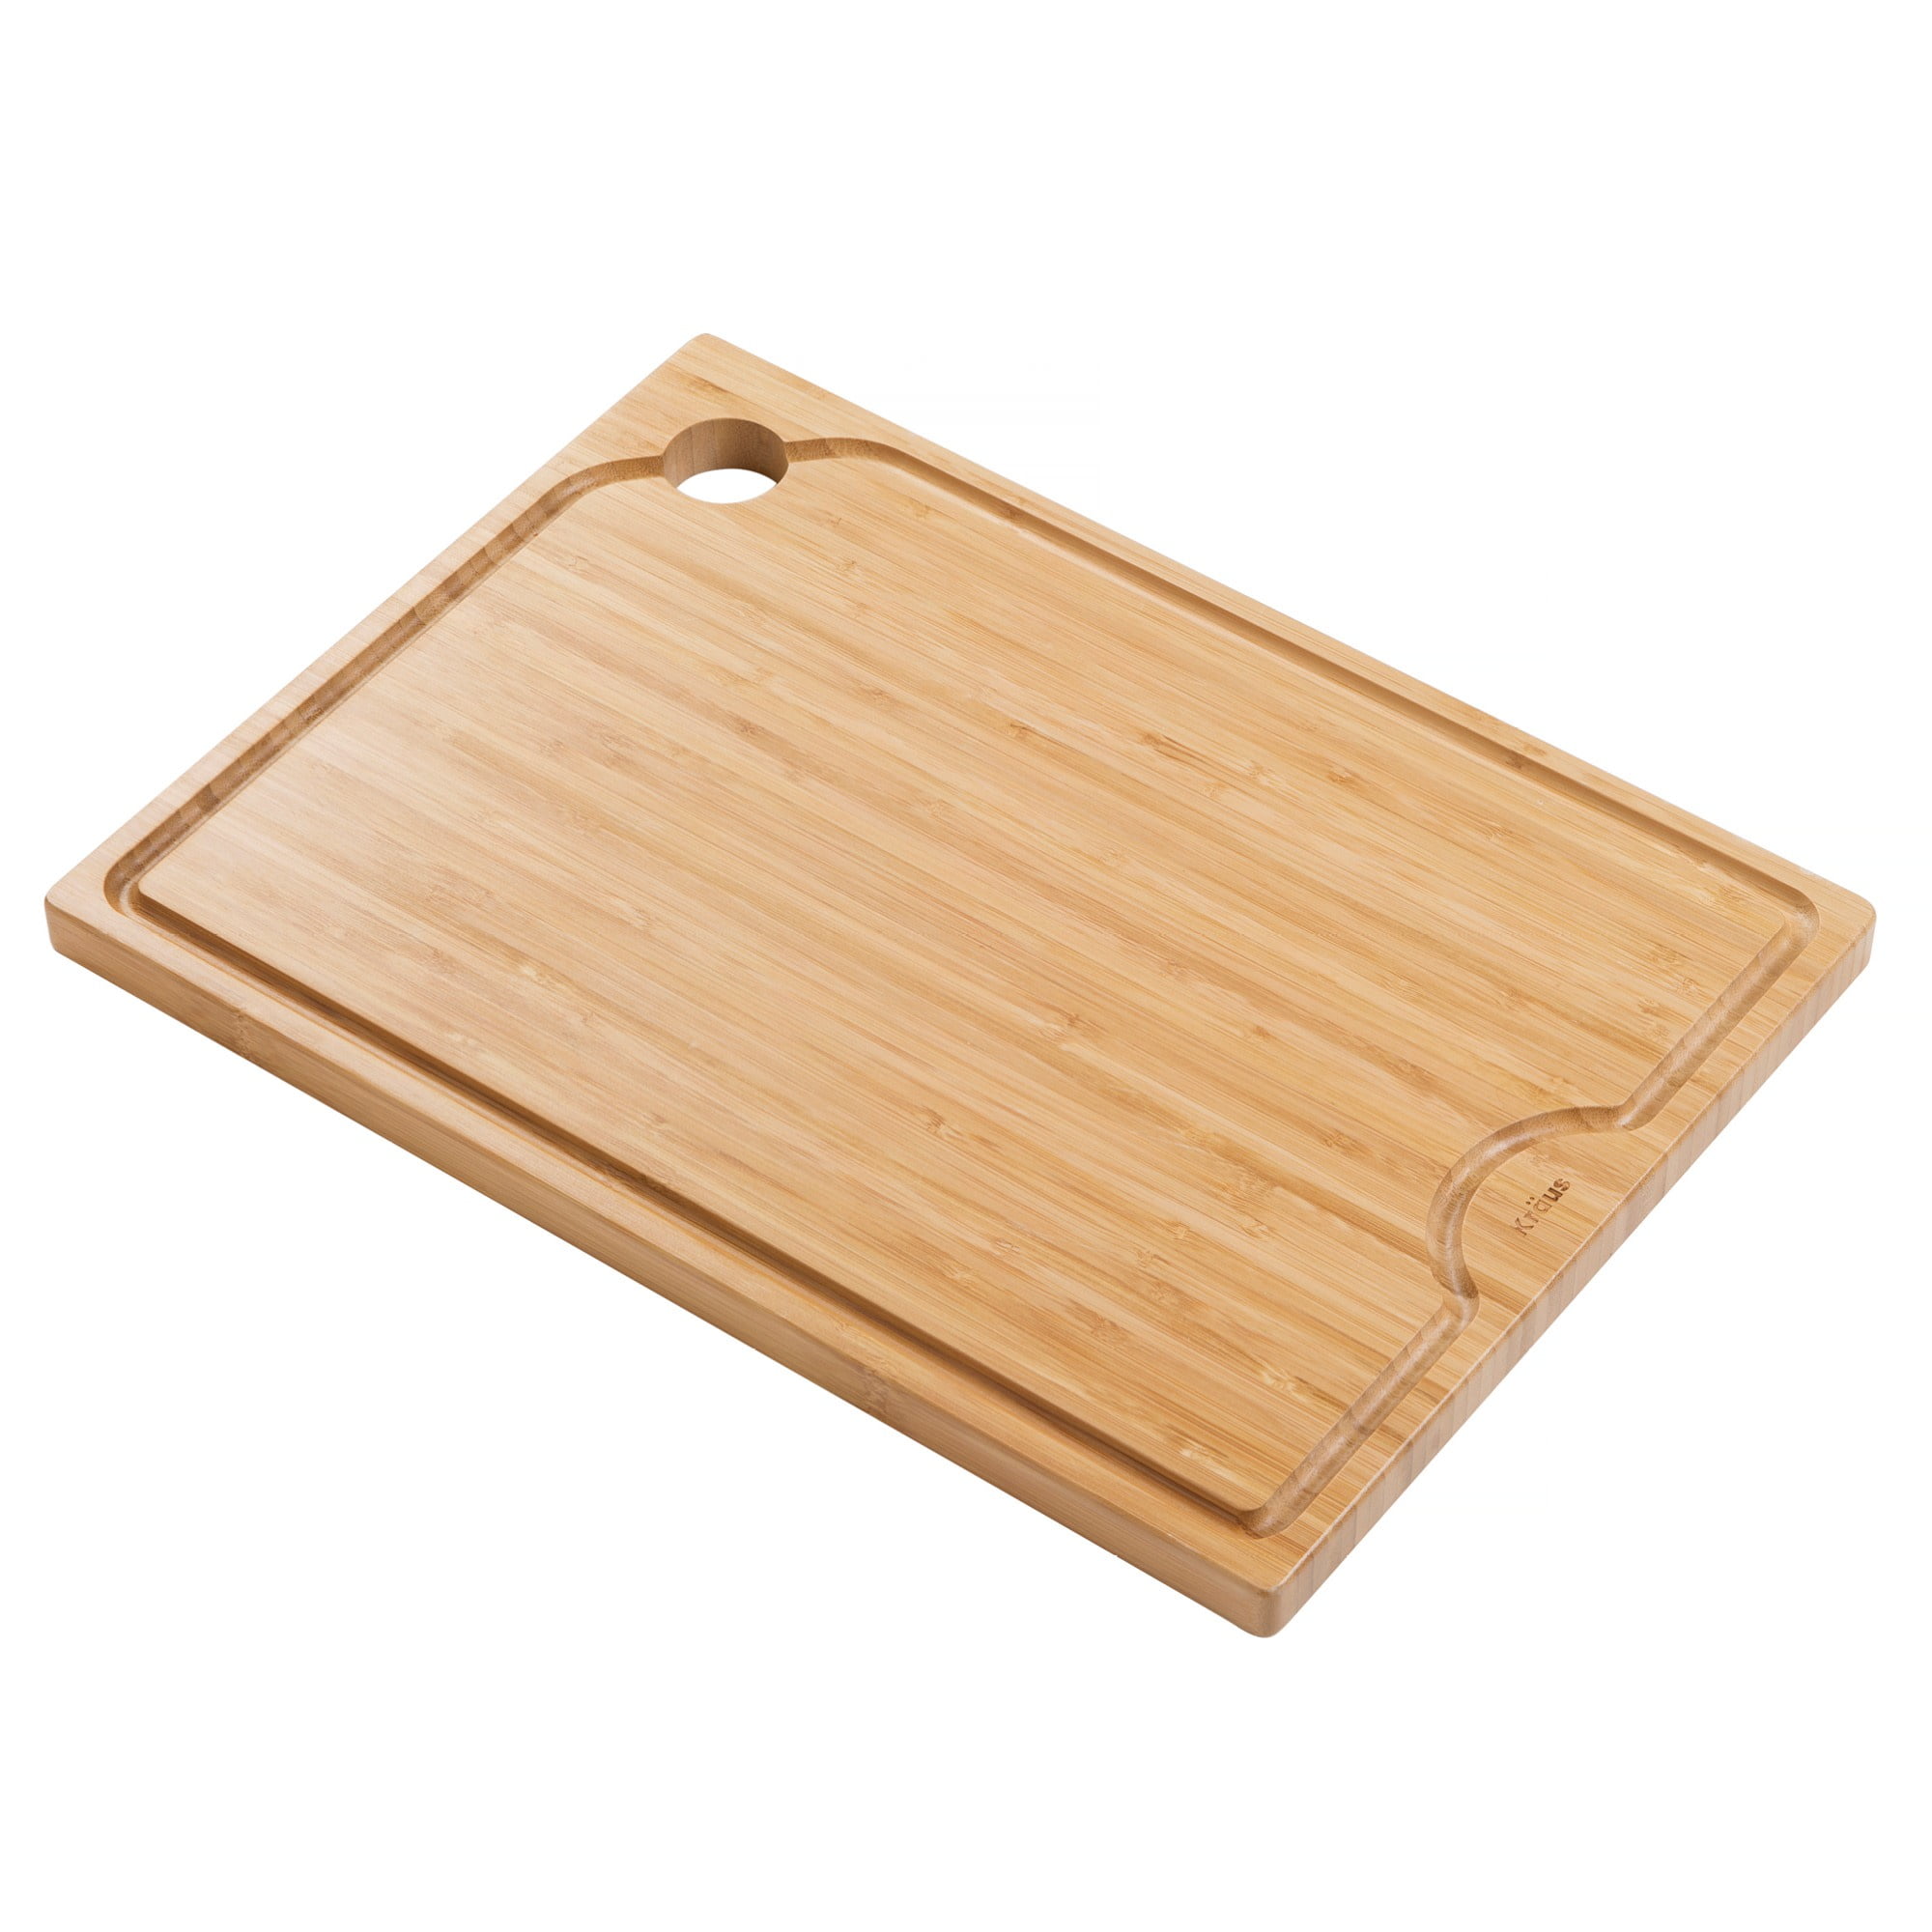 Cucina Green 30 inches Noodle Board, Stove Top Cover, Acacia Wood  Adjustable Legs 